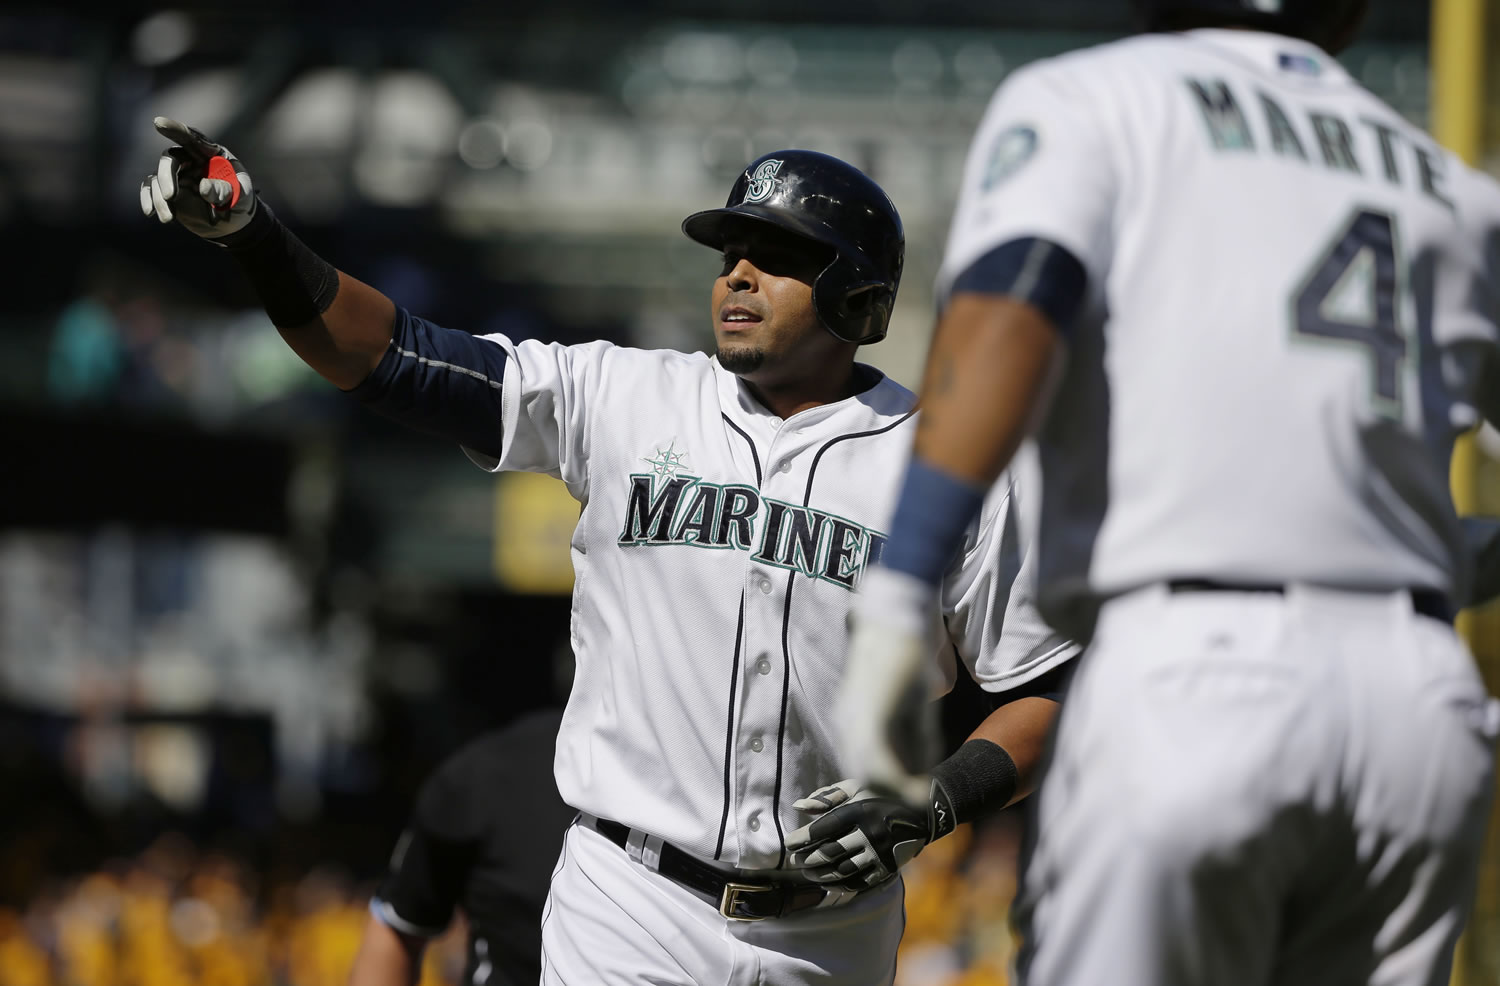 Seattle Mariners' Nelson Cruz reacts as he reaches home plate after hitting a two-run home run that also scored Ketel Marte (4) in the seventh inning of a baseball game against the Texas Rangers, Thursday, Sept. 10, 2015, in Seattle. The Mariners won 5-0. (AP Photo/Ted S.